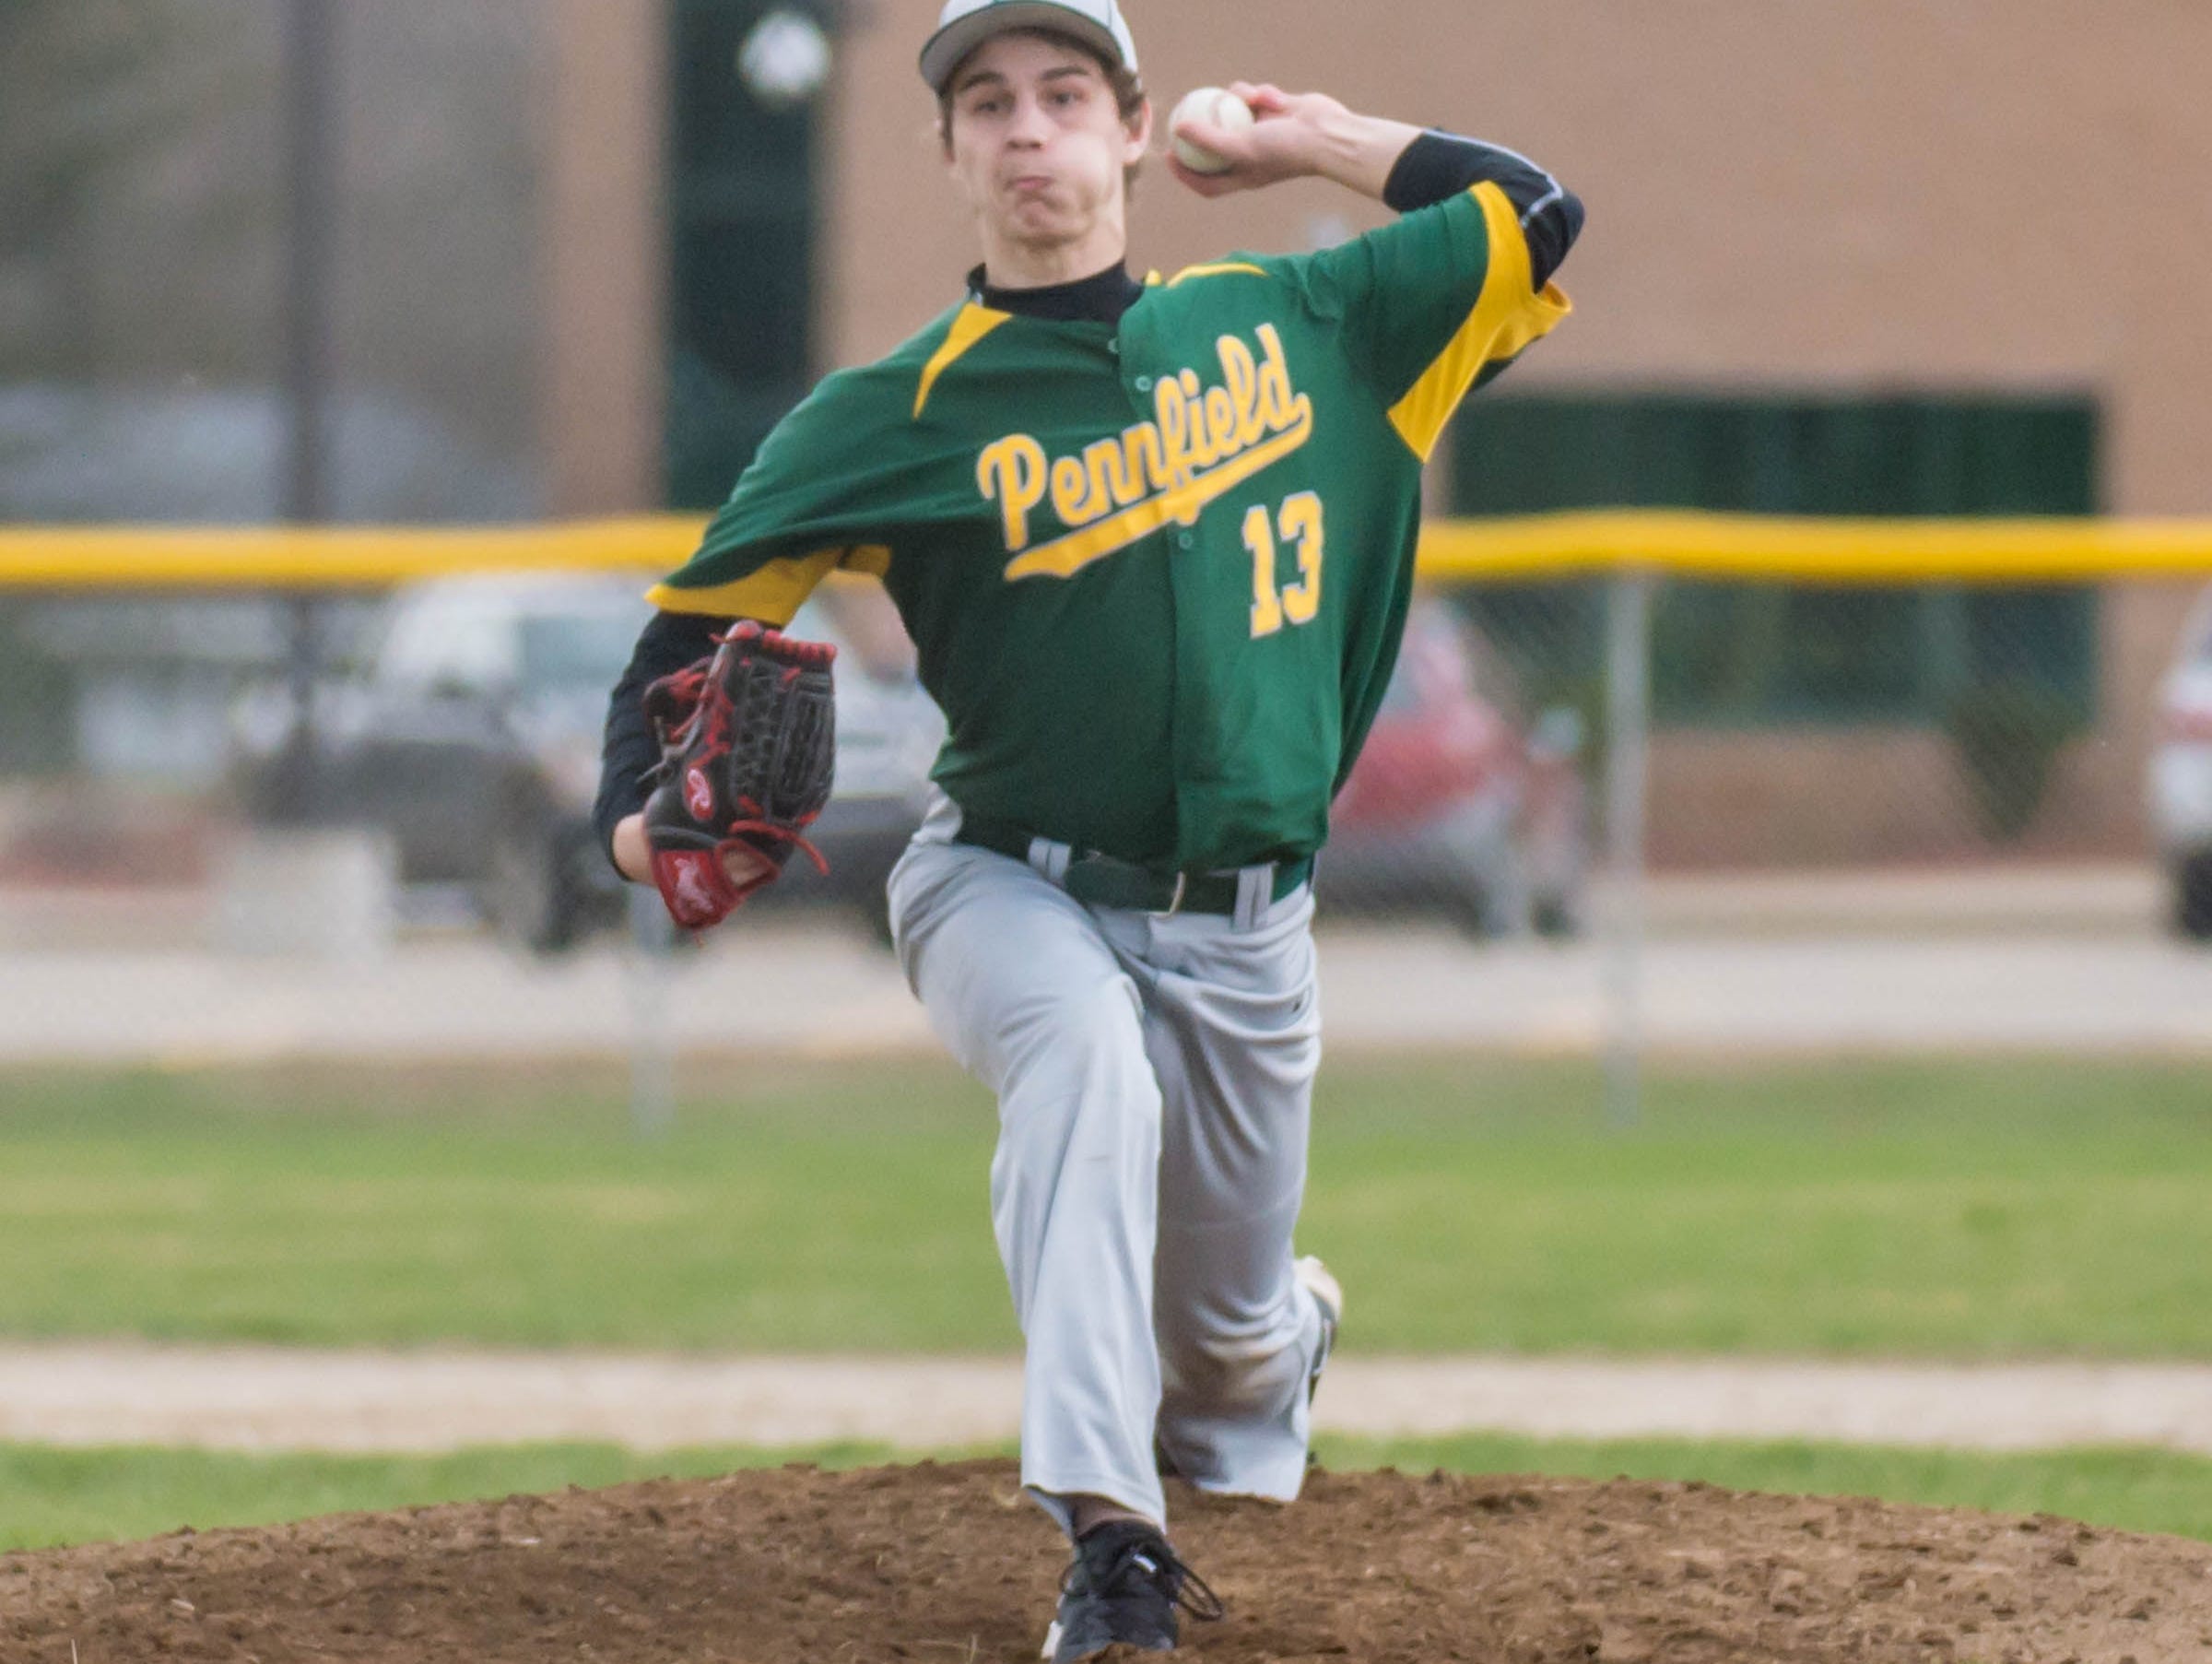 Pennfield's Jeremy Cook pitches against Lakeview during a recent game.